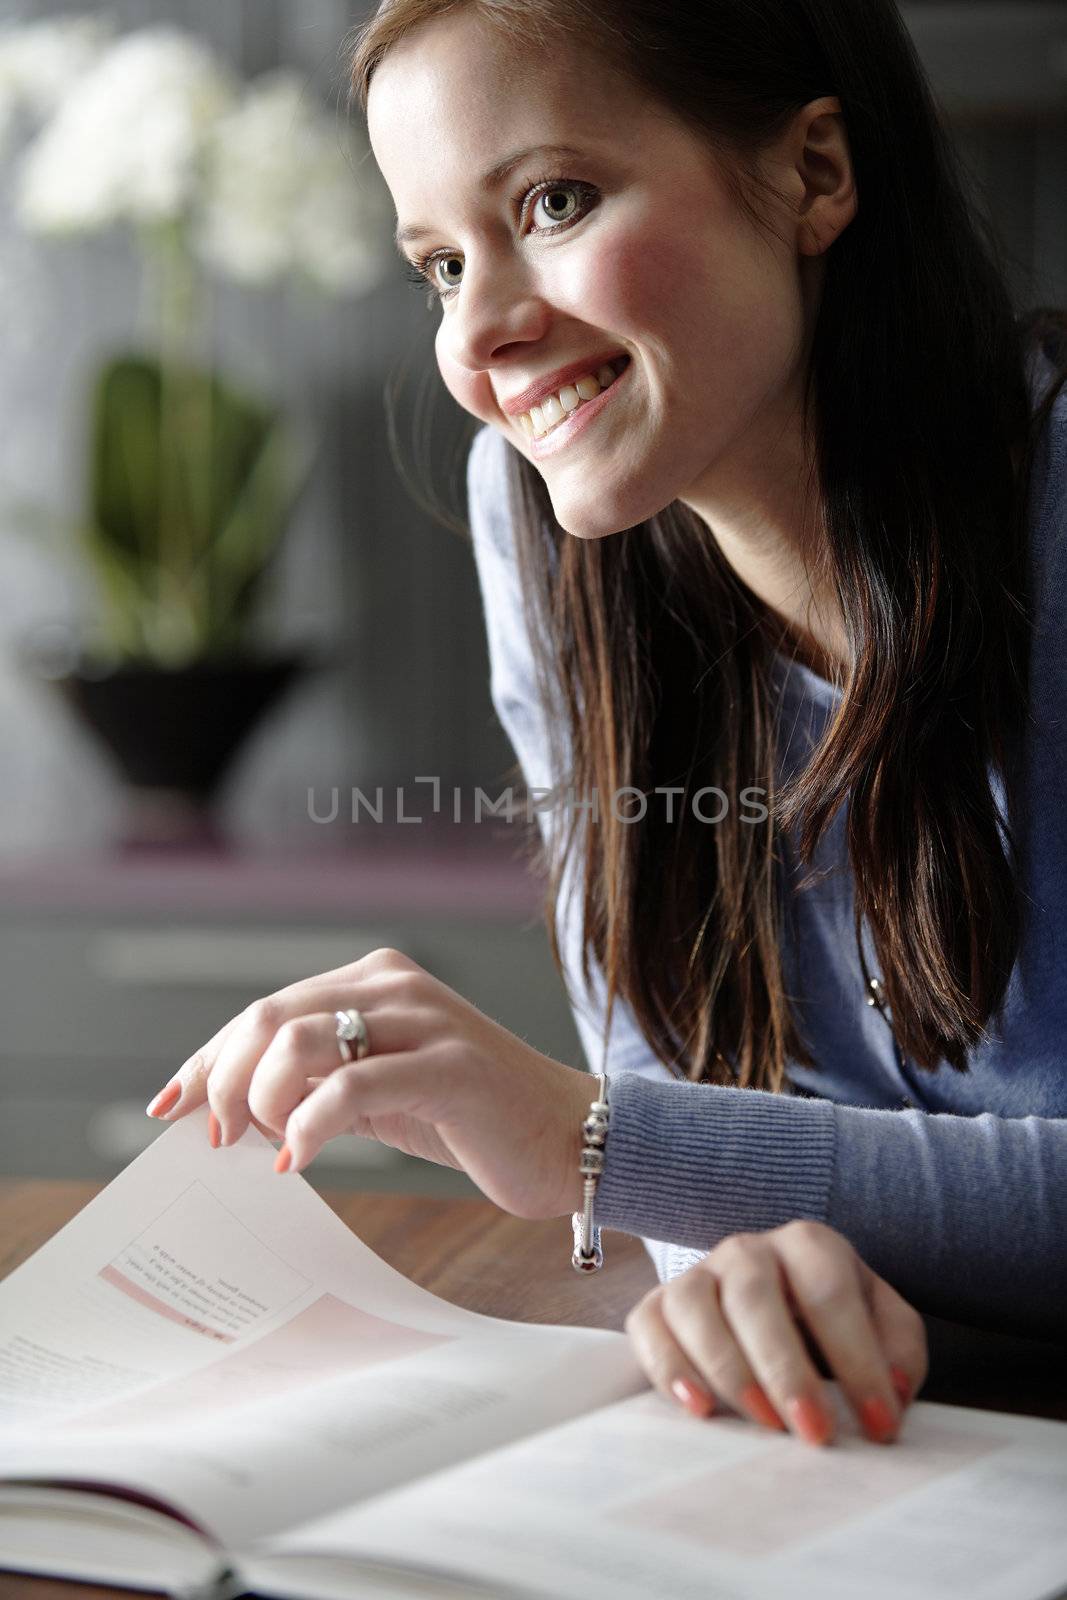 Attractive young woman reading a recipe from a cookery book in her kitchen.